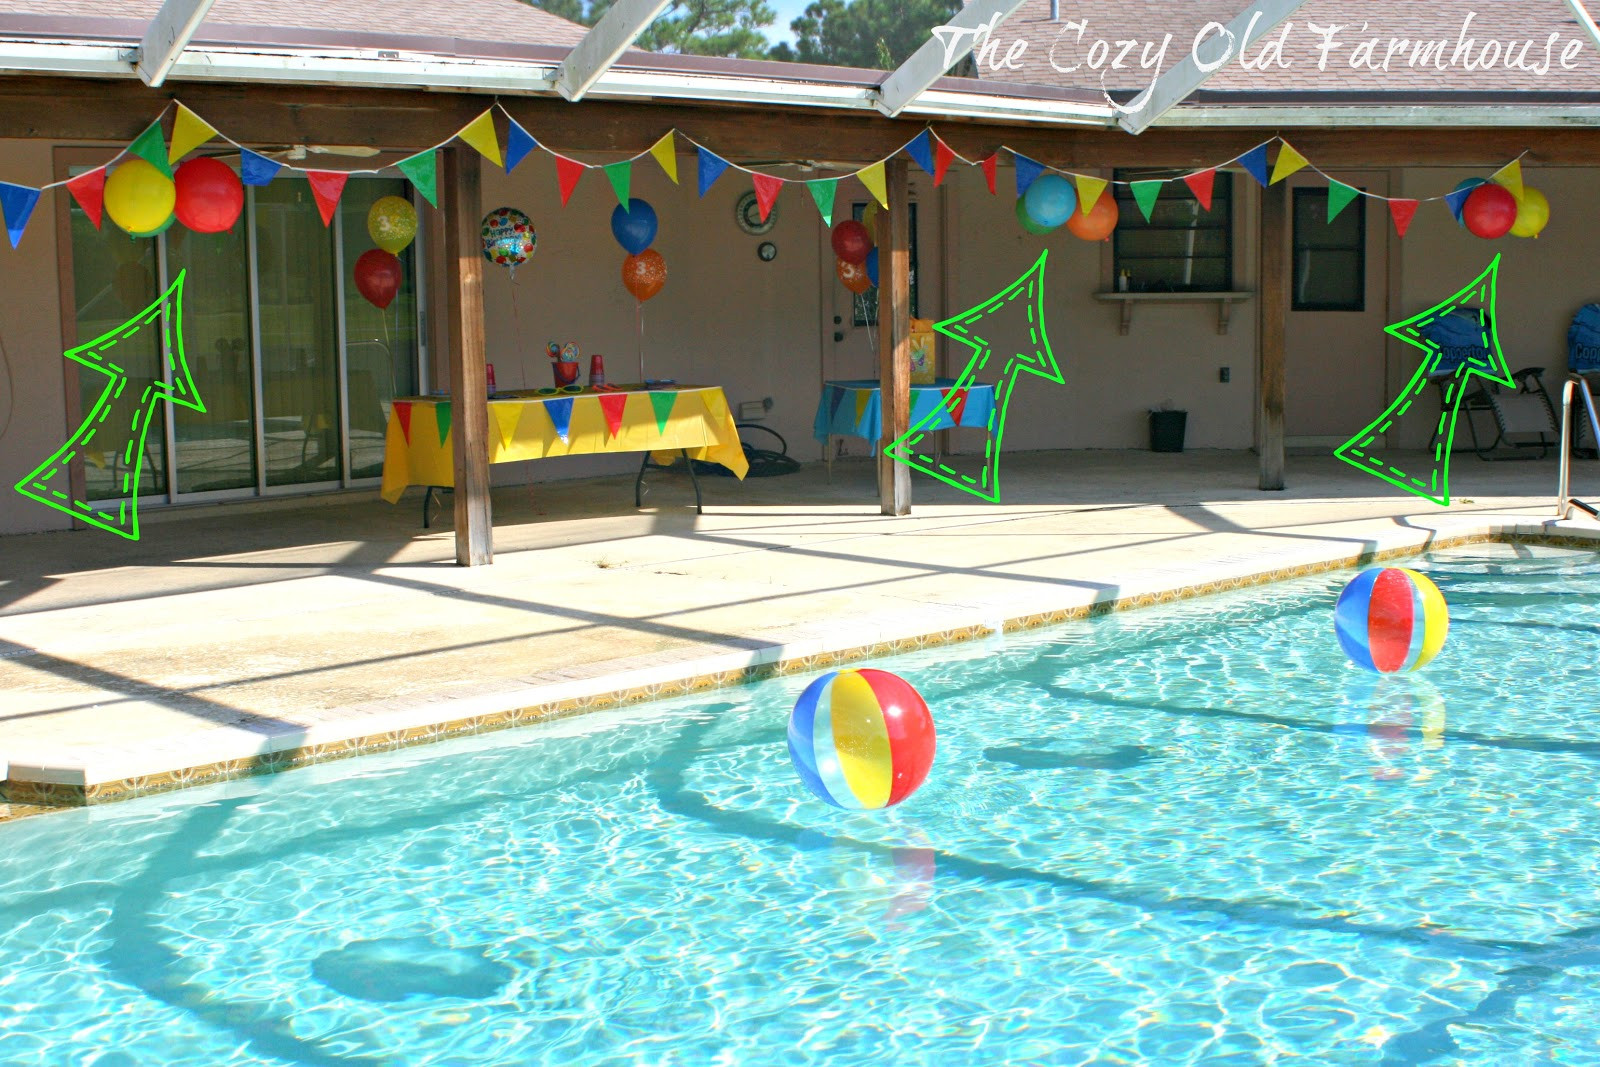 Poolside Party Decoration Ideas
 The Cozy Old "Farmhouse" Simple and Bud Friendly Pool